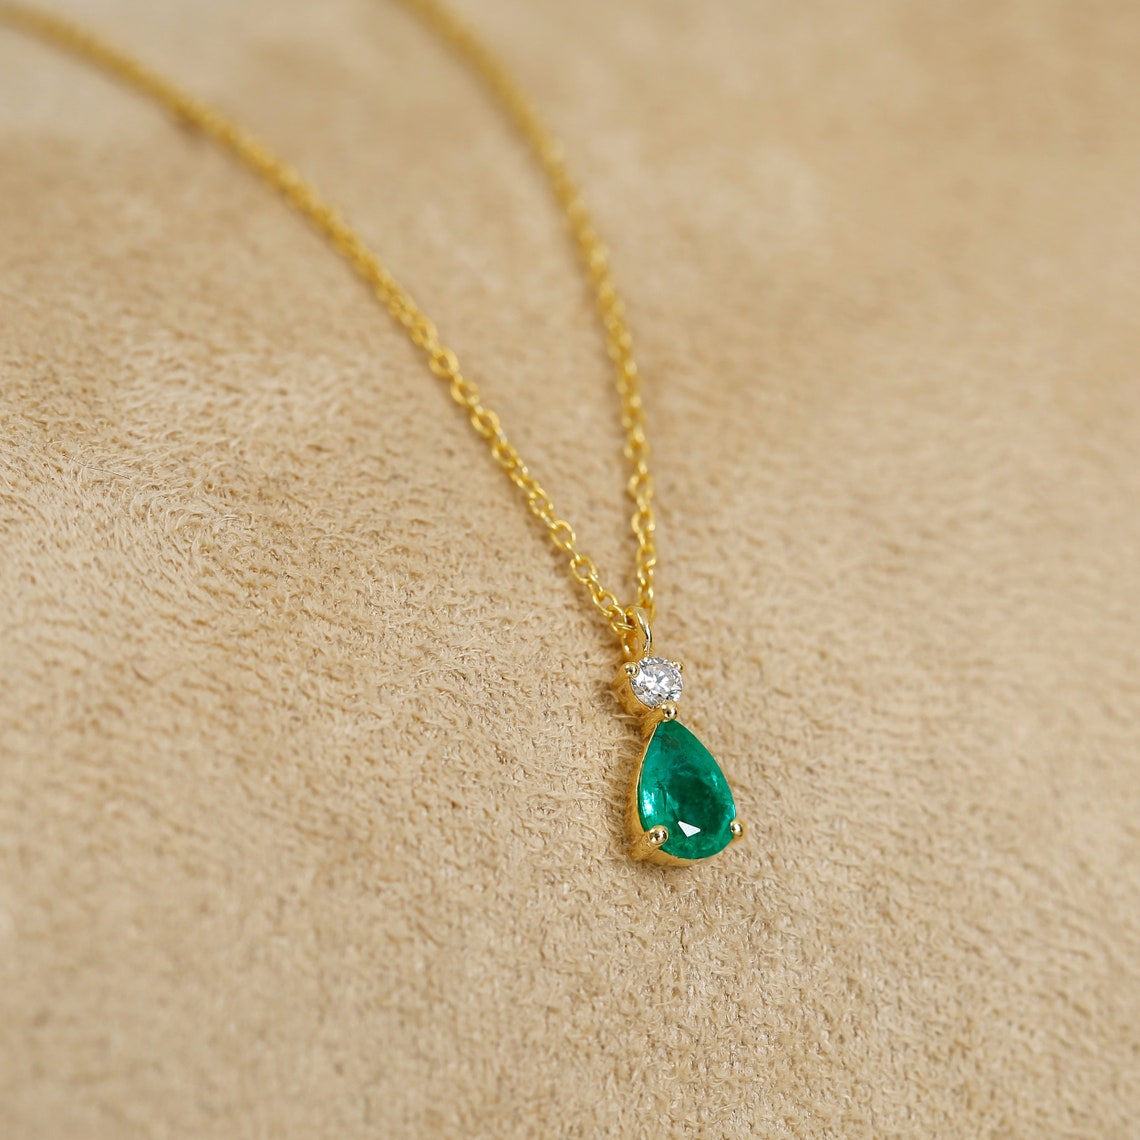 Genuine Emerald Pear Shape Pendant Necklaces in 14k Gold / | Etsy